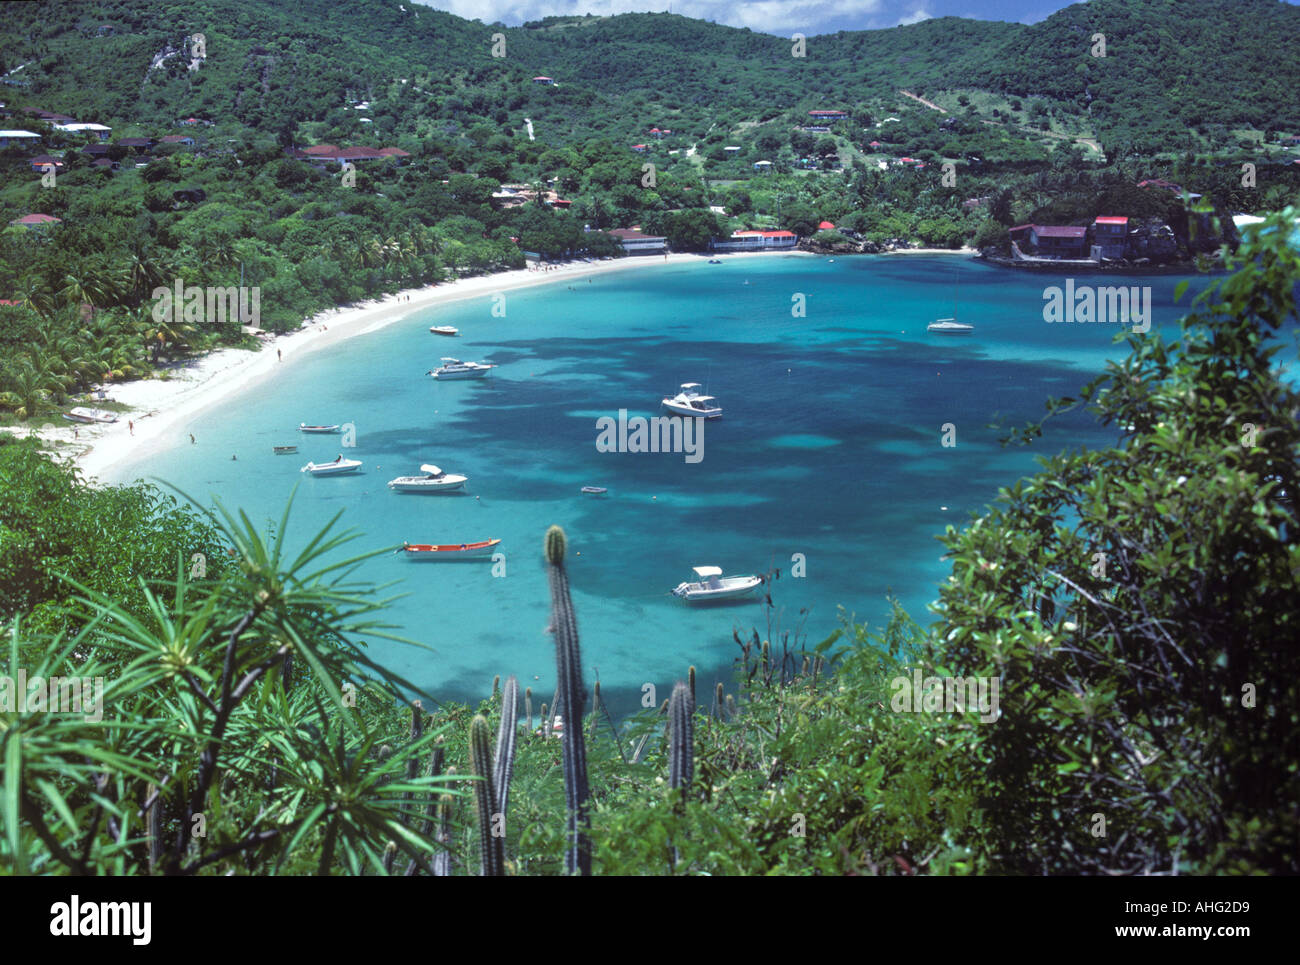 St Martin French West Indies Stockfoto